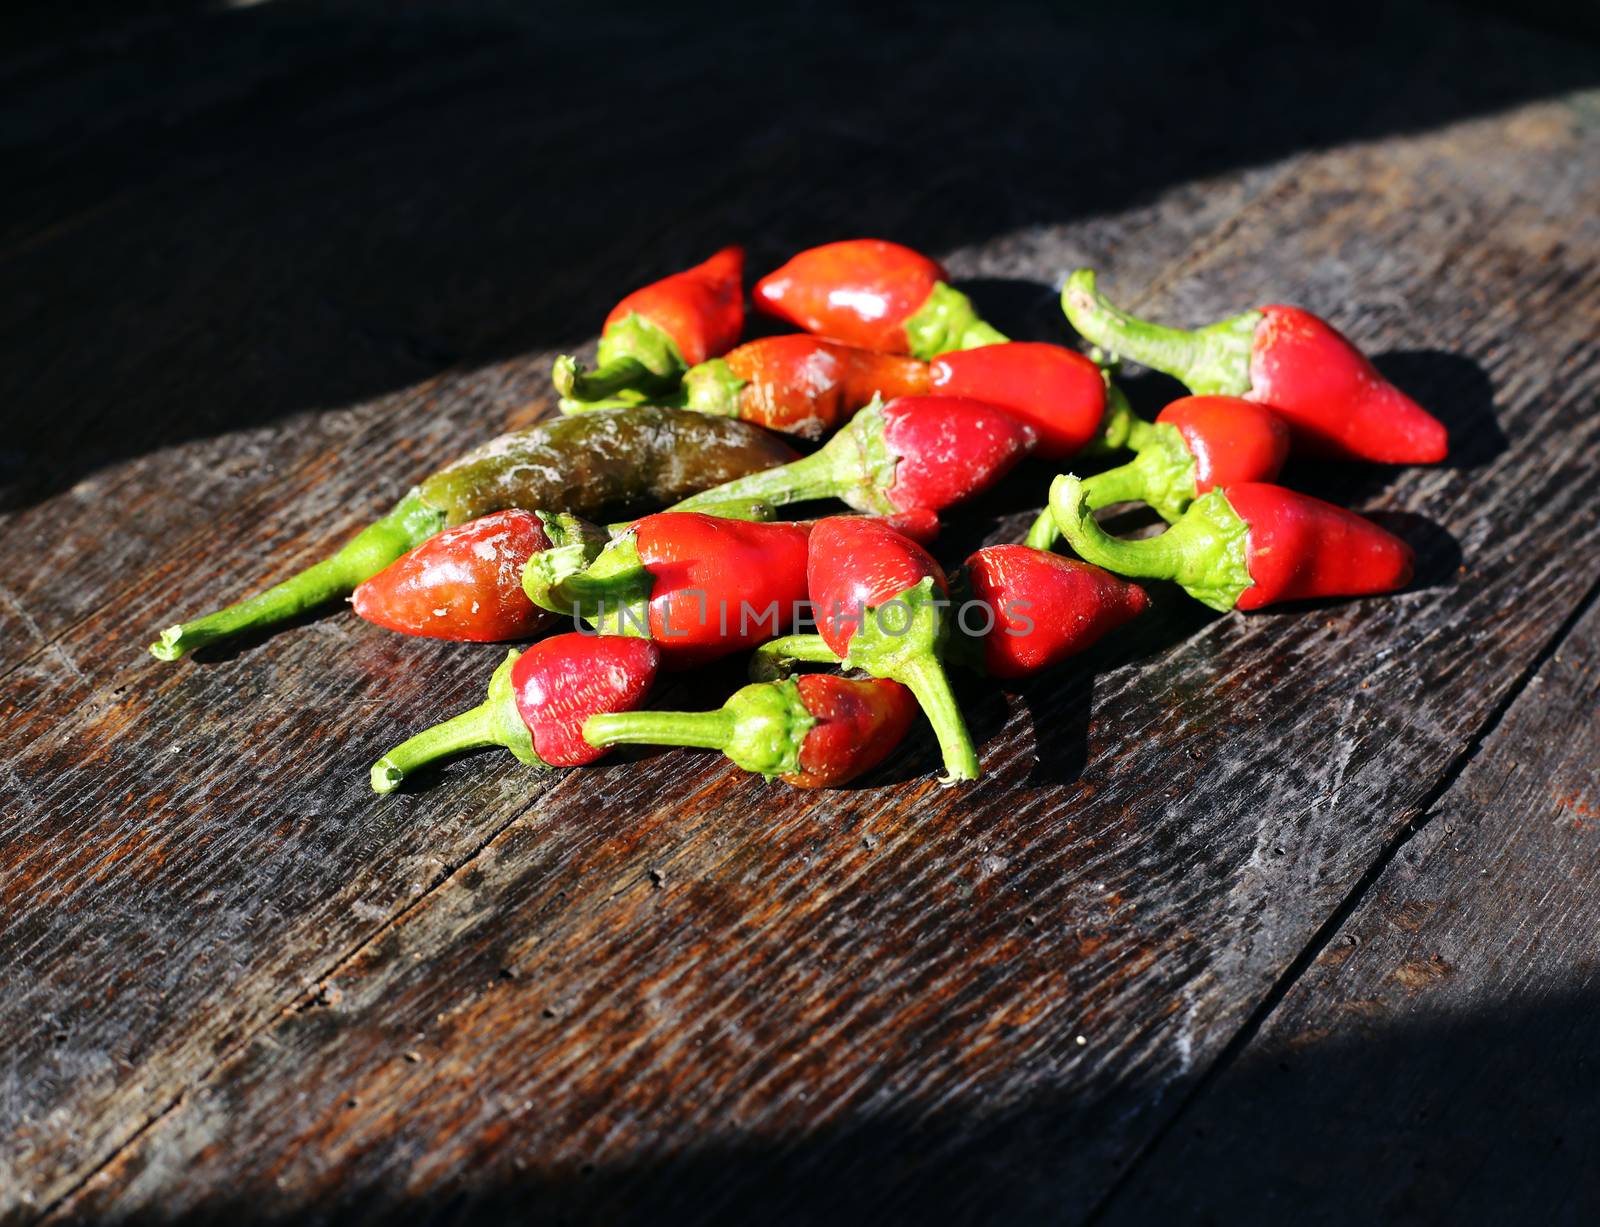  chili peppers by alexkosev